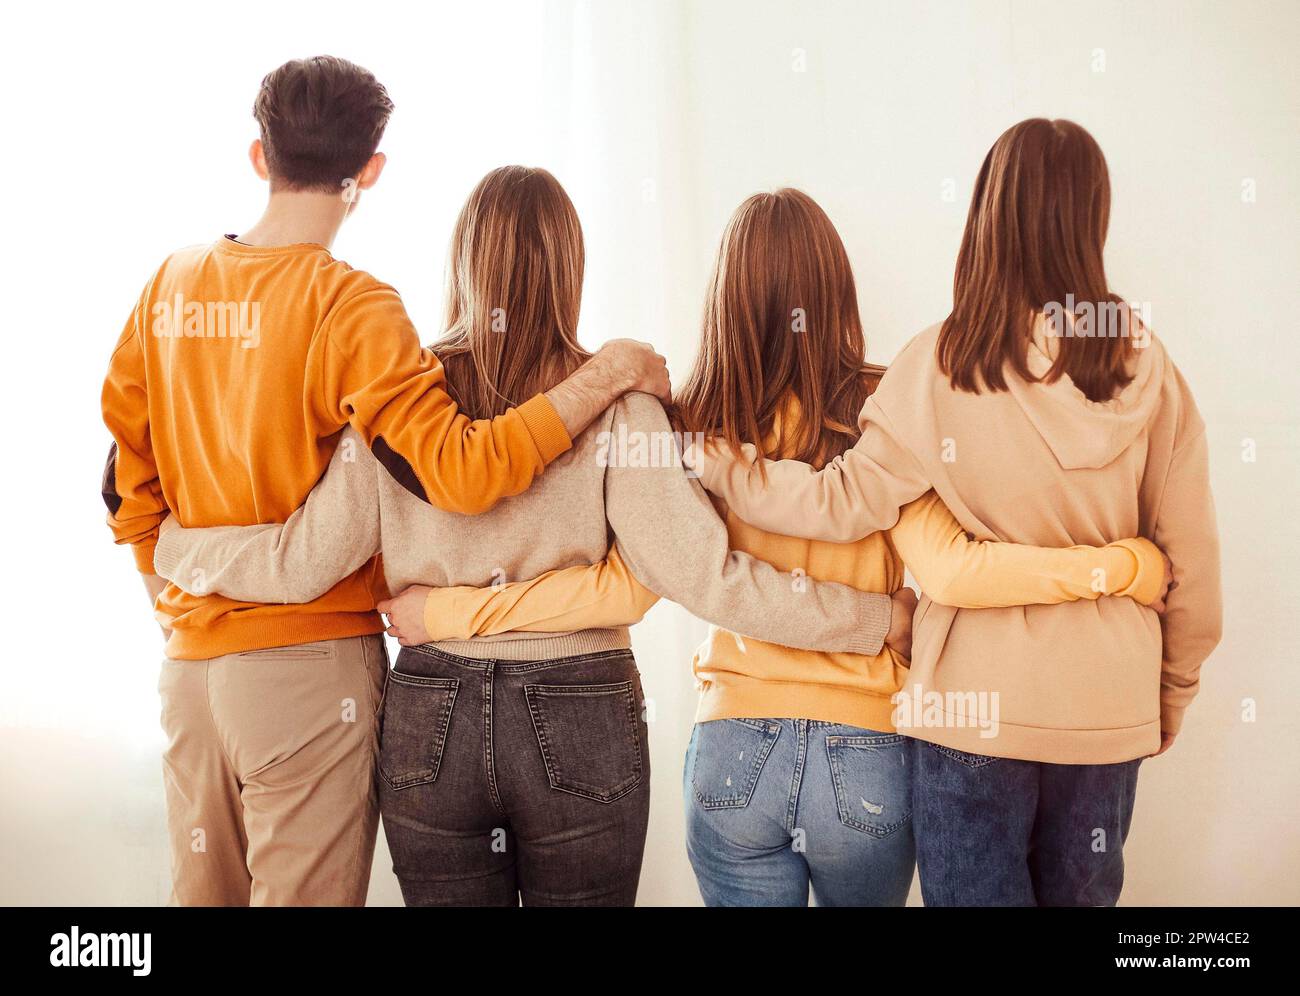 Back view of anonymous man and women embracing each other while symbolizing unity against white background Stock Photo